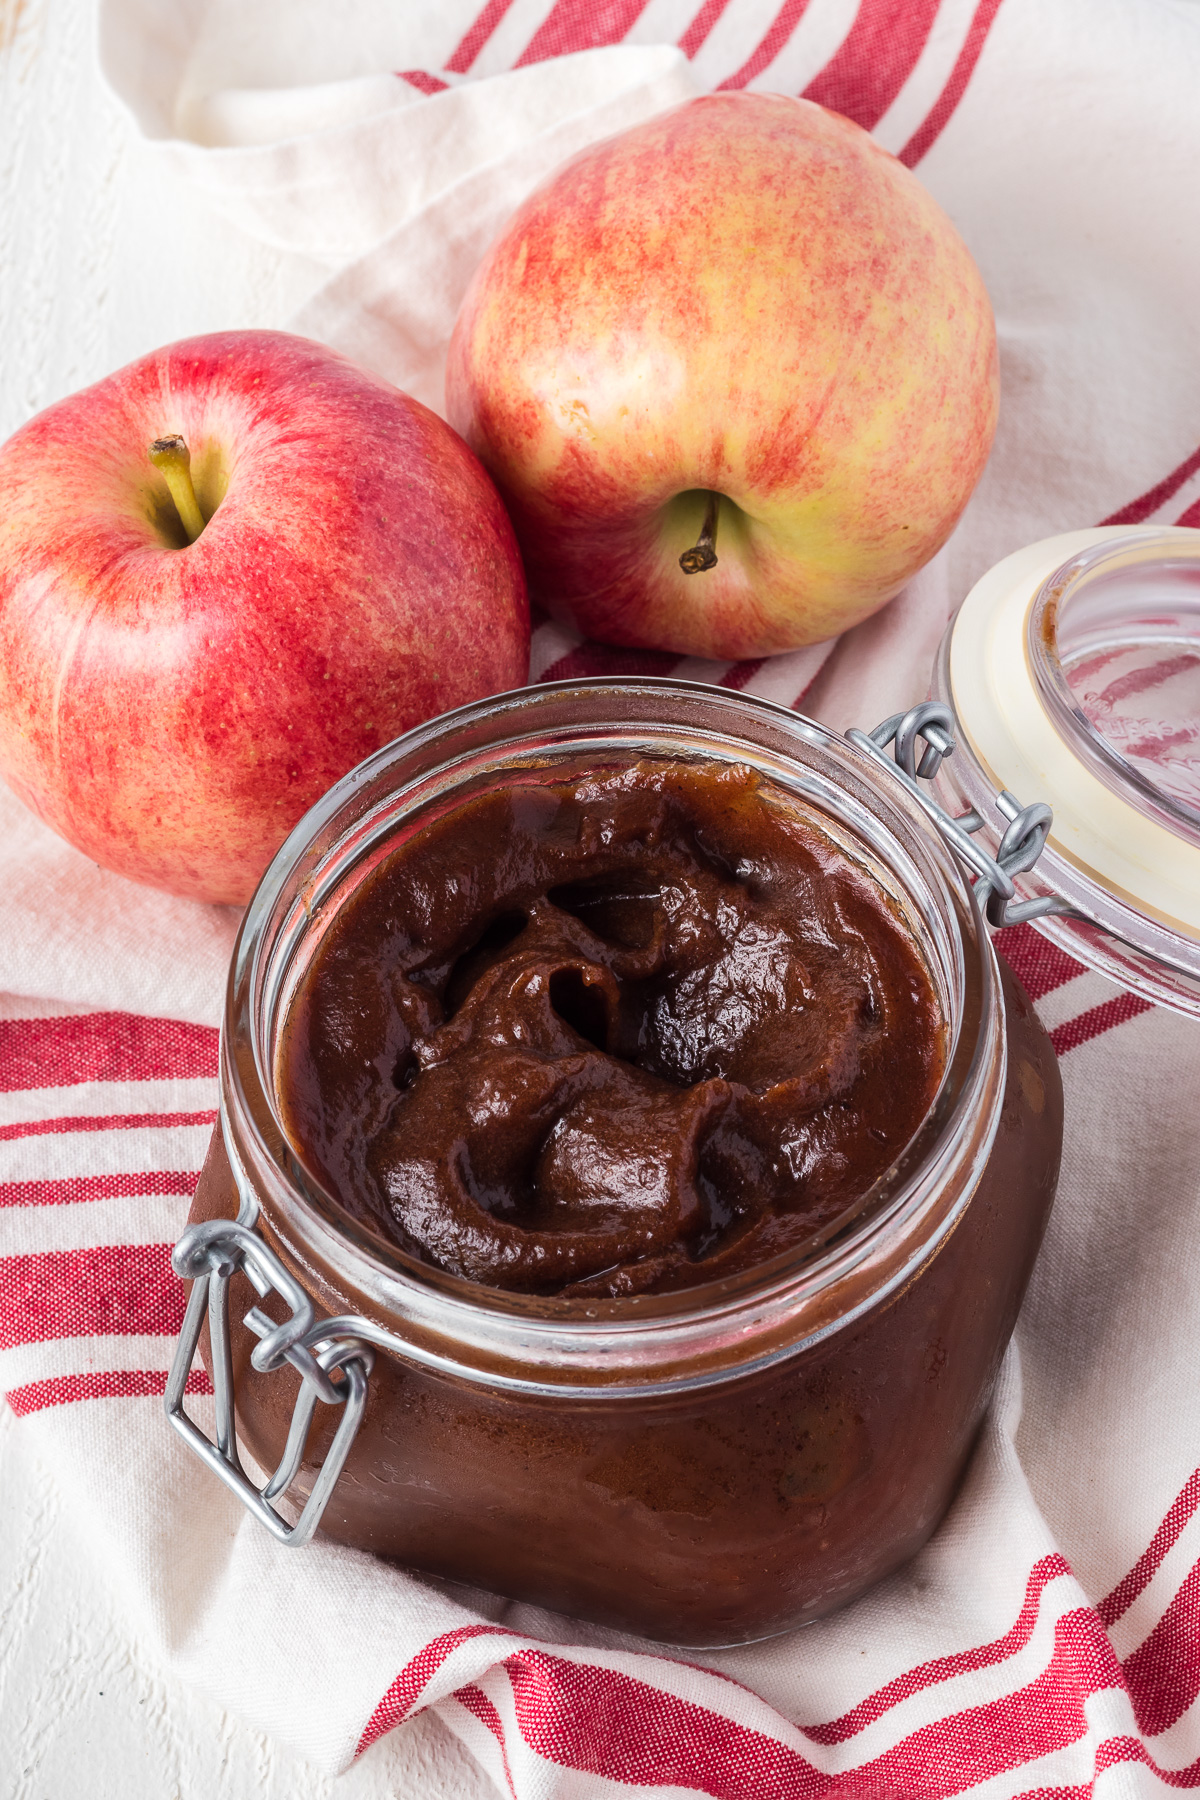 This homemade Slow Cooker Apple Butter is chock full of fall flavors. Imagine coming home to the warm scents of cinnamon, nutmeg, and cloves simmering in your slow cooker. The best part is smoothing that warm apple butter over homemade biscuits for a delightful snack! via @foodhussy